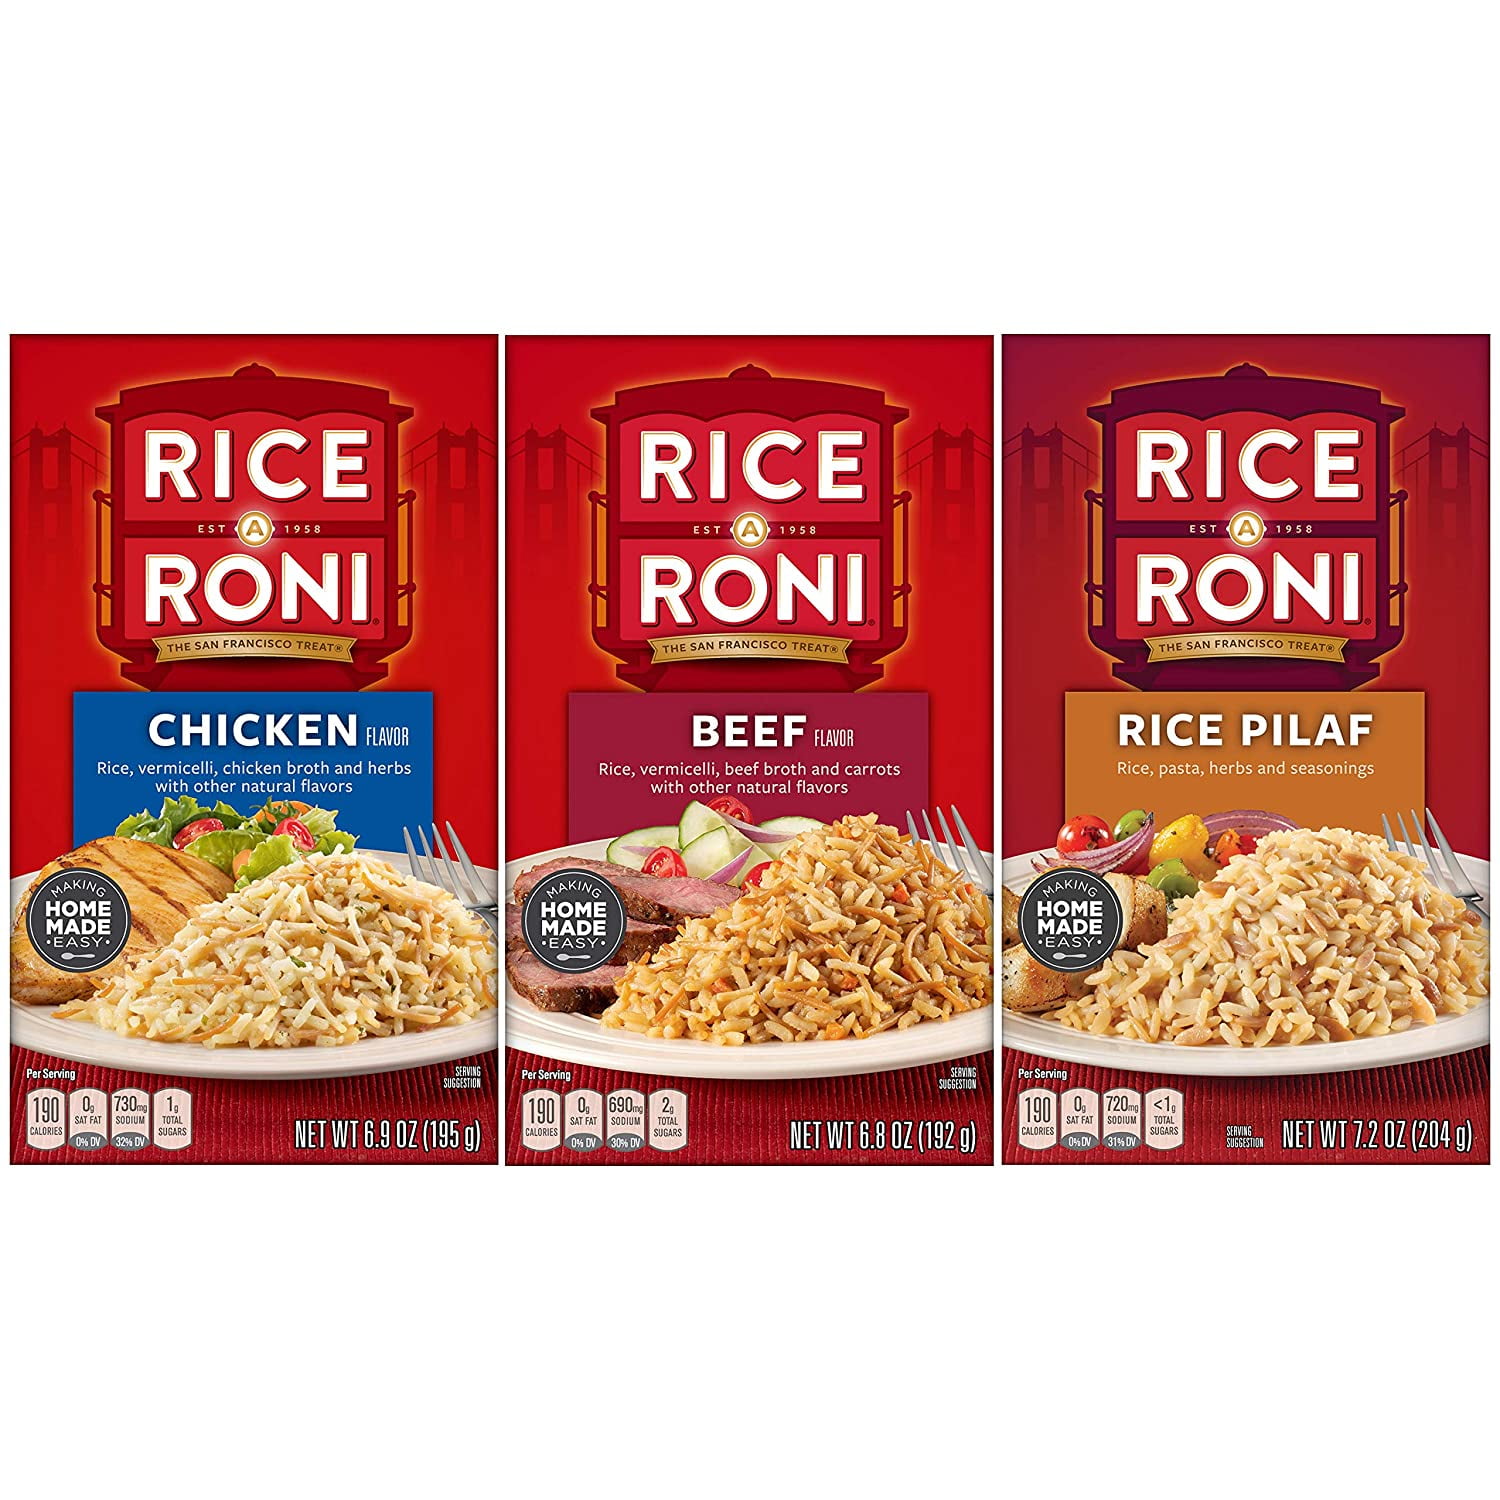 Save on Rice-A-Roni 90 Second Heat & Eat Chicken Rice Flavor Order